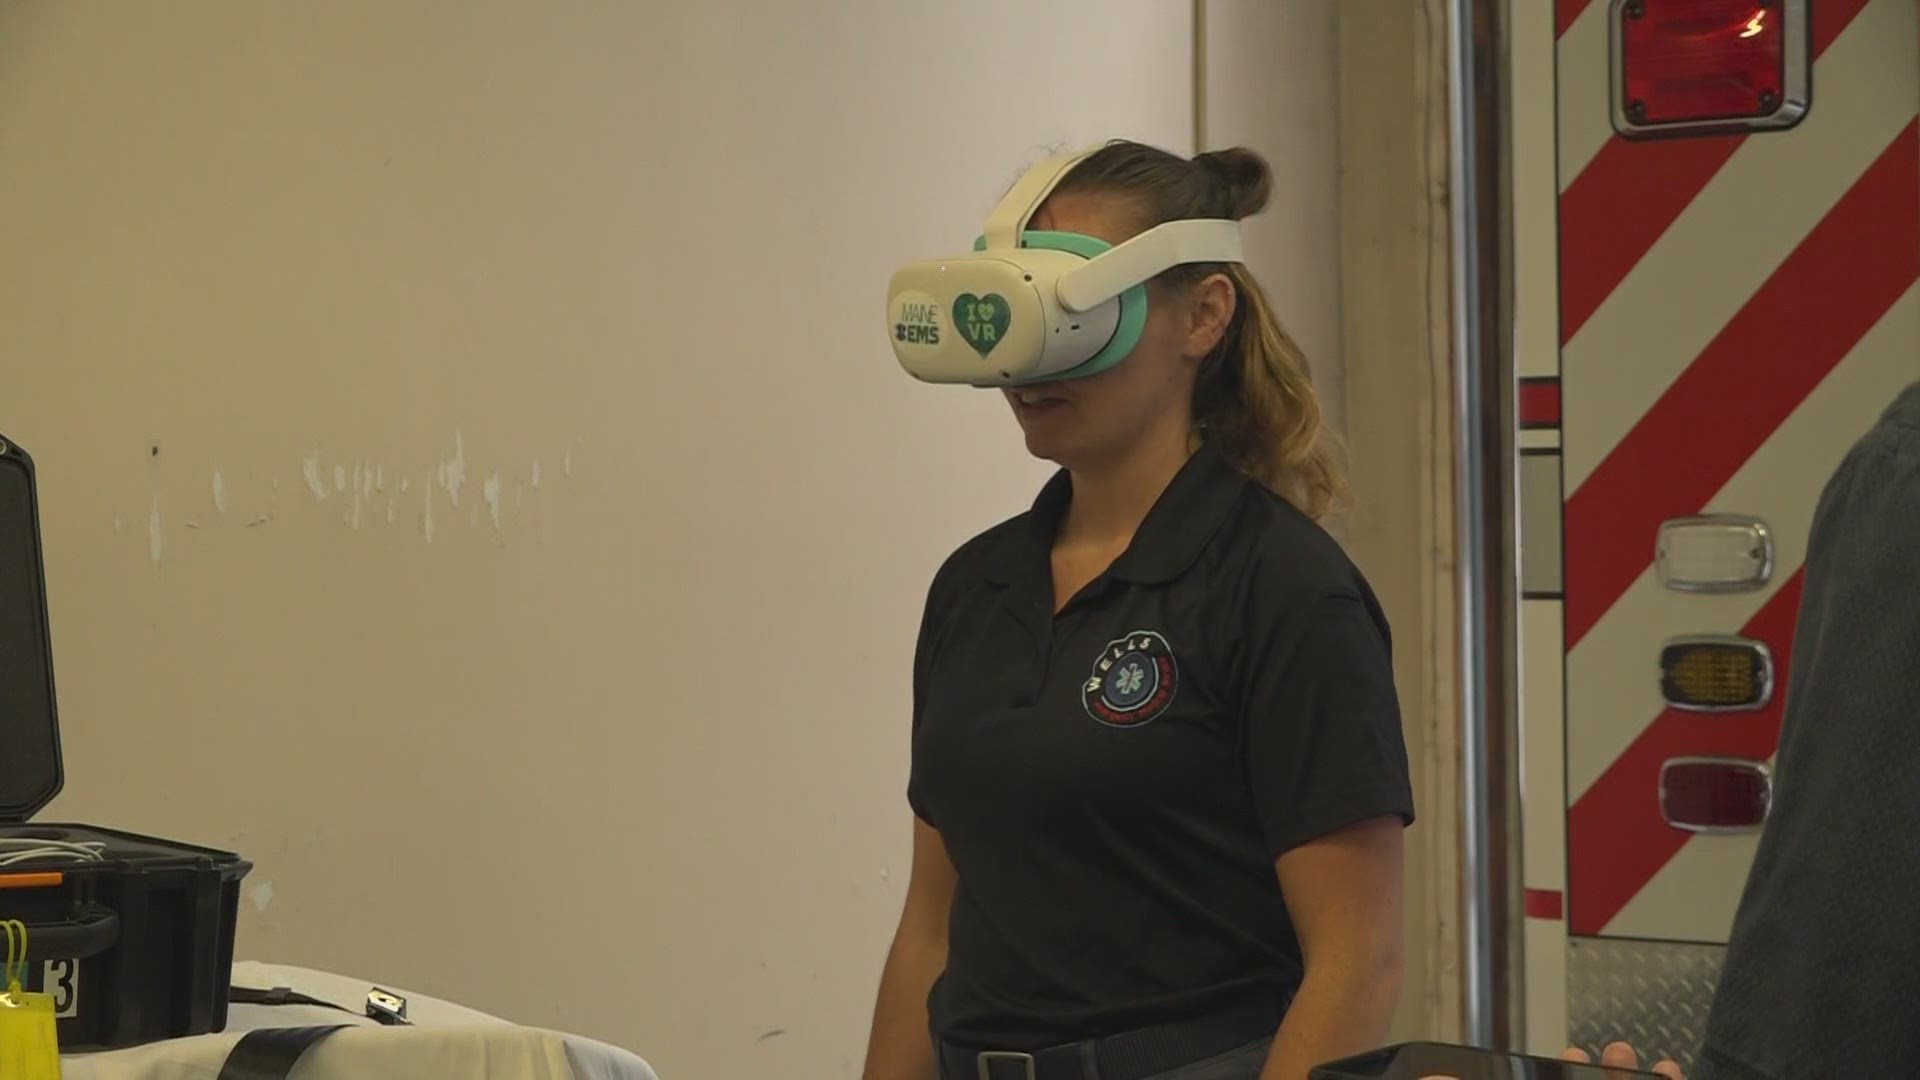 The virtual reality headsets and training applications are designed to mimic real-life emergency situations with kids.